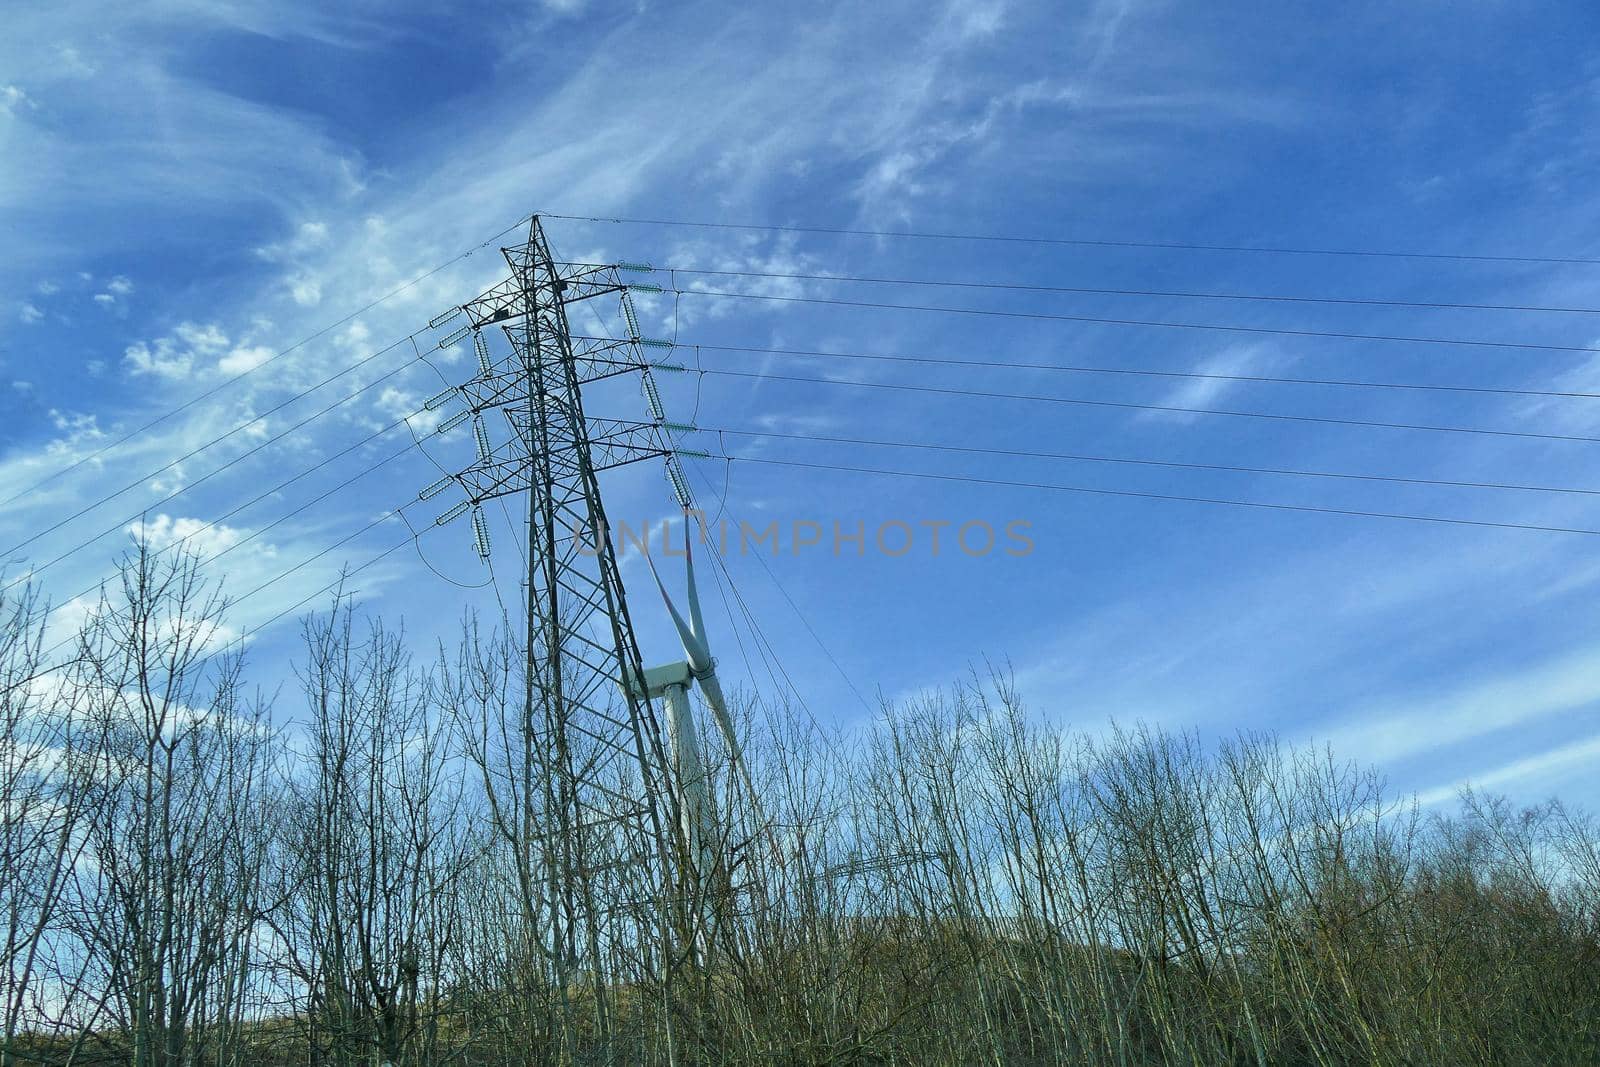 Wind turbine in natural environment near high voltage pylon by lemar